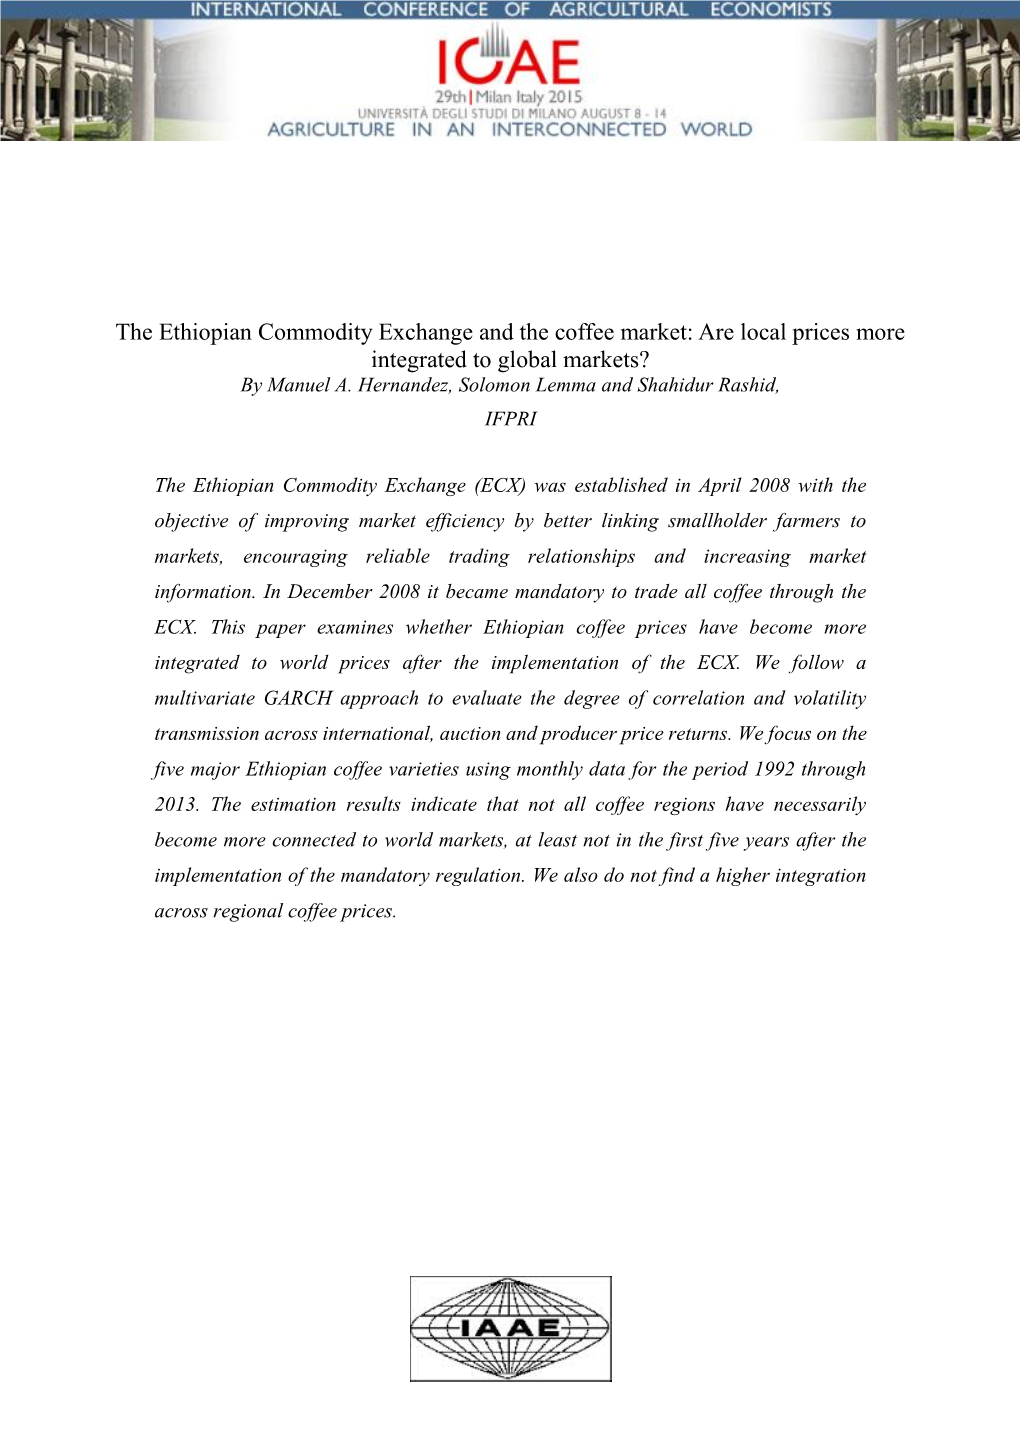 The Ethiopian Commodity Exchange and the Coffee Market: Are Local Prices More Integrated to Global Markets? by Manuel A